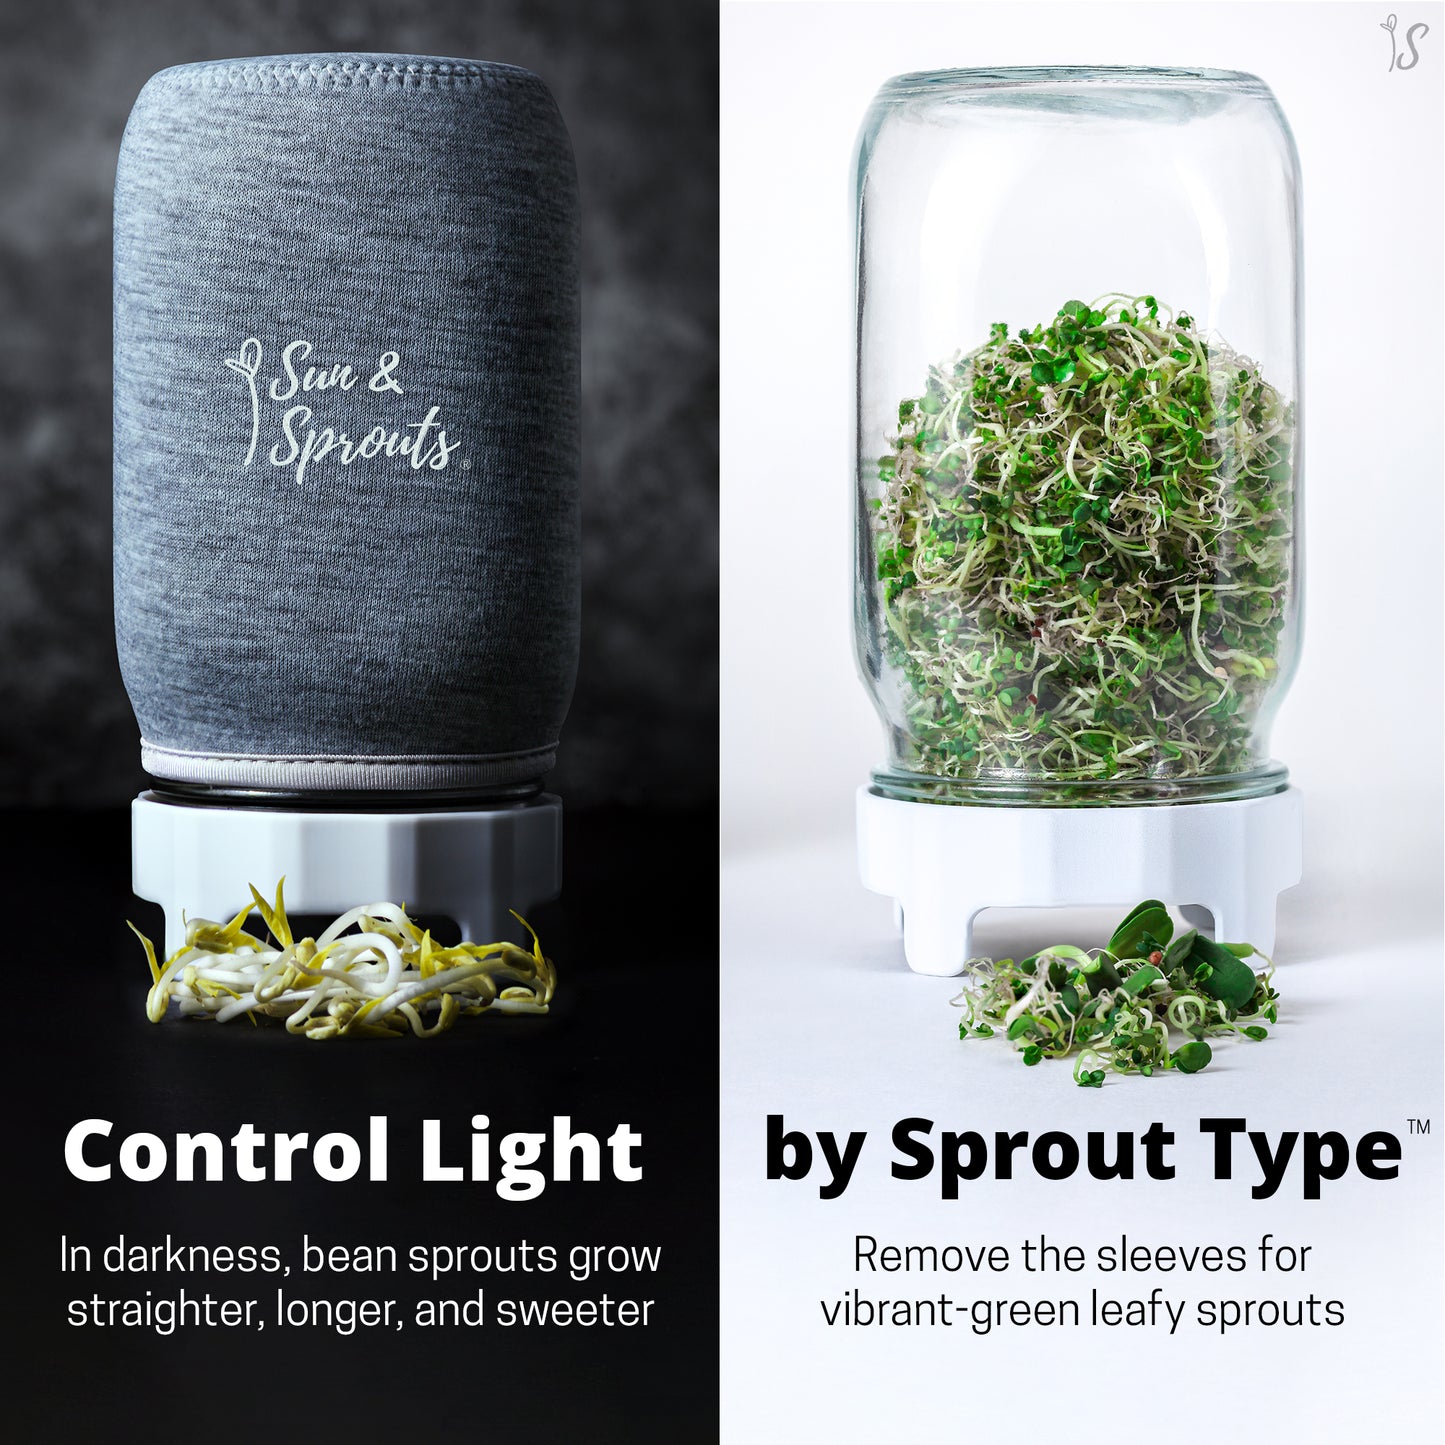 "Perfect sprouts in 5 days. So easy!"